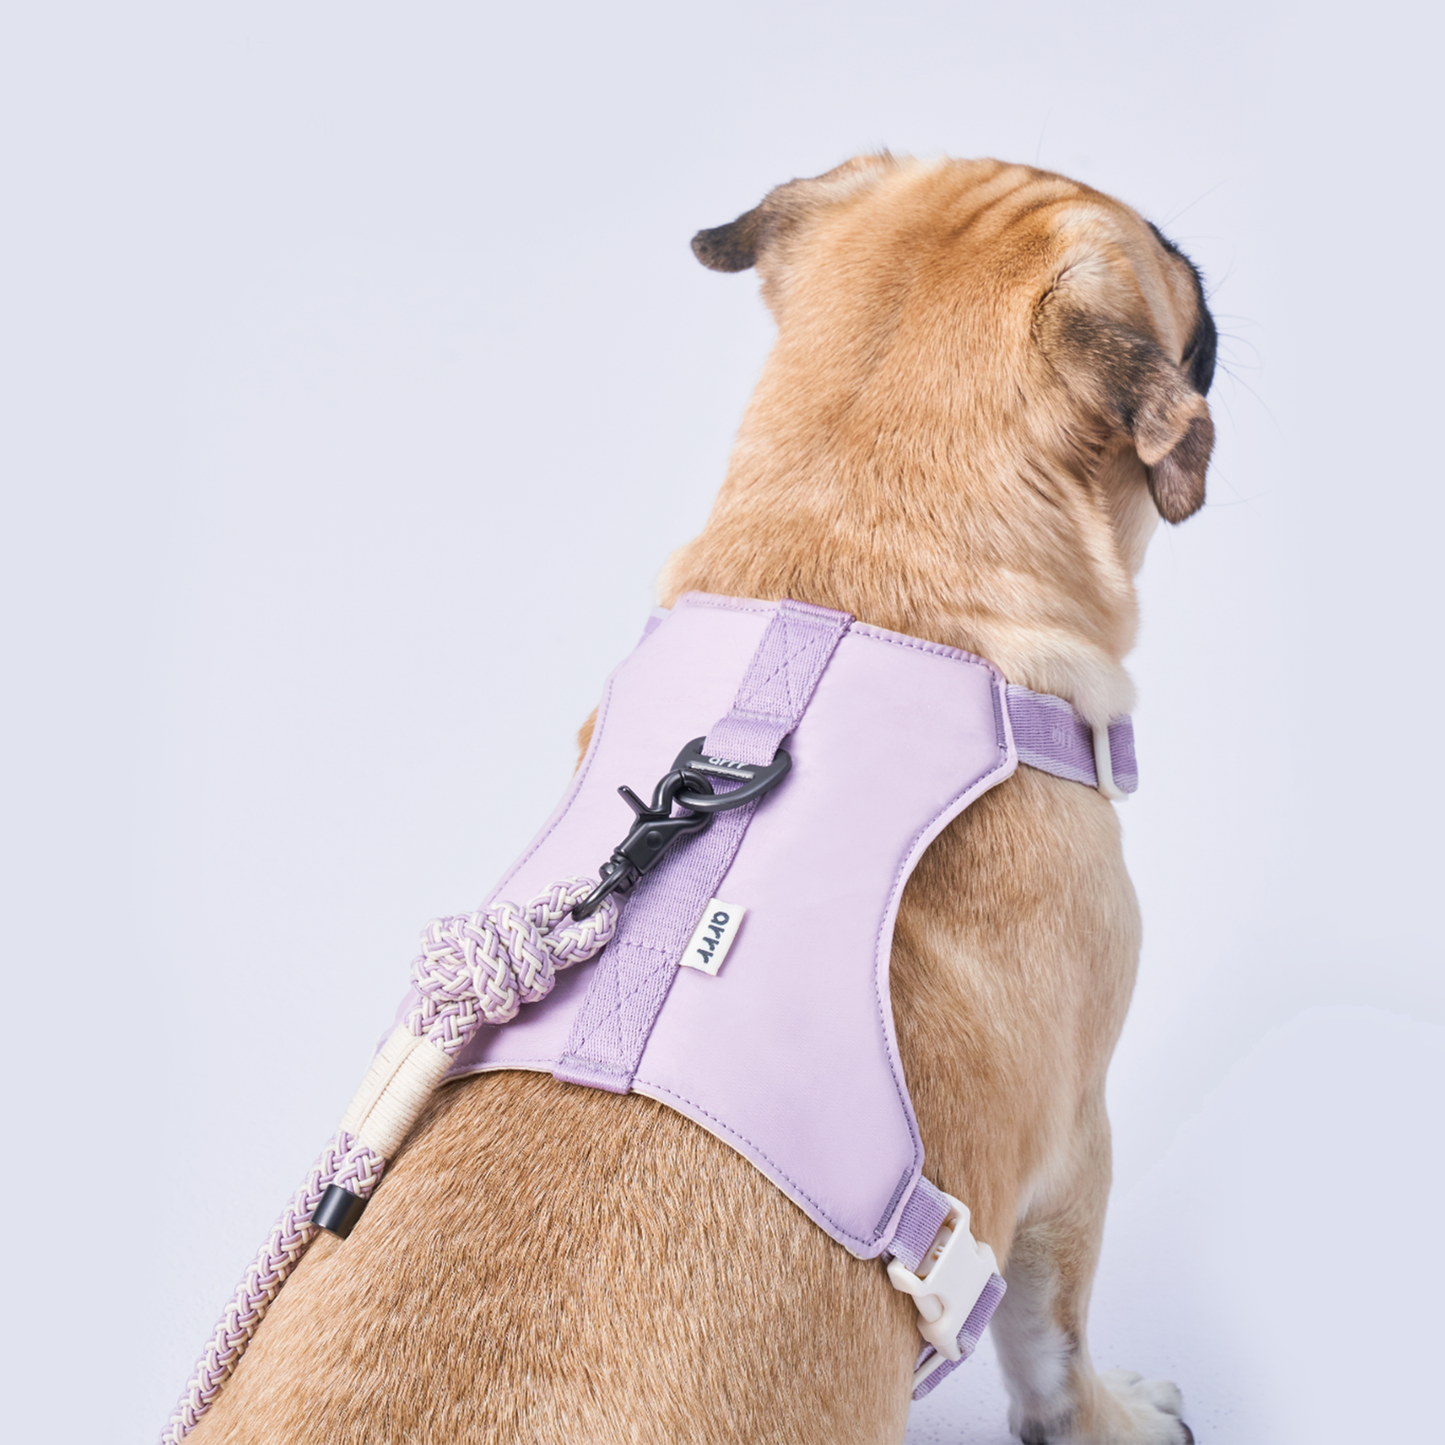 arrr Adjustable dog chest harness in lavender colour. Featuring an elastic strap and leash clip. Made of EVA material, which is super light, soft, and shock-absorbing!